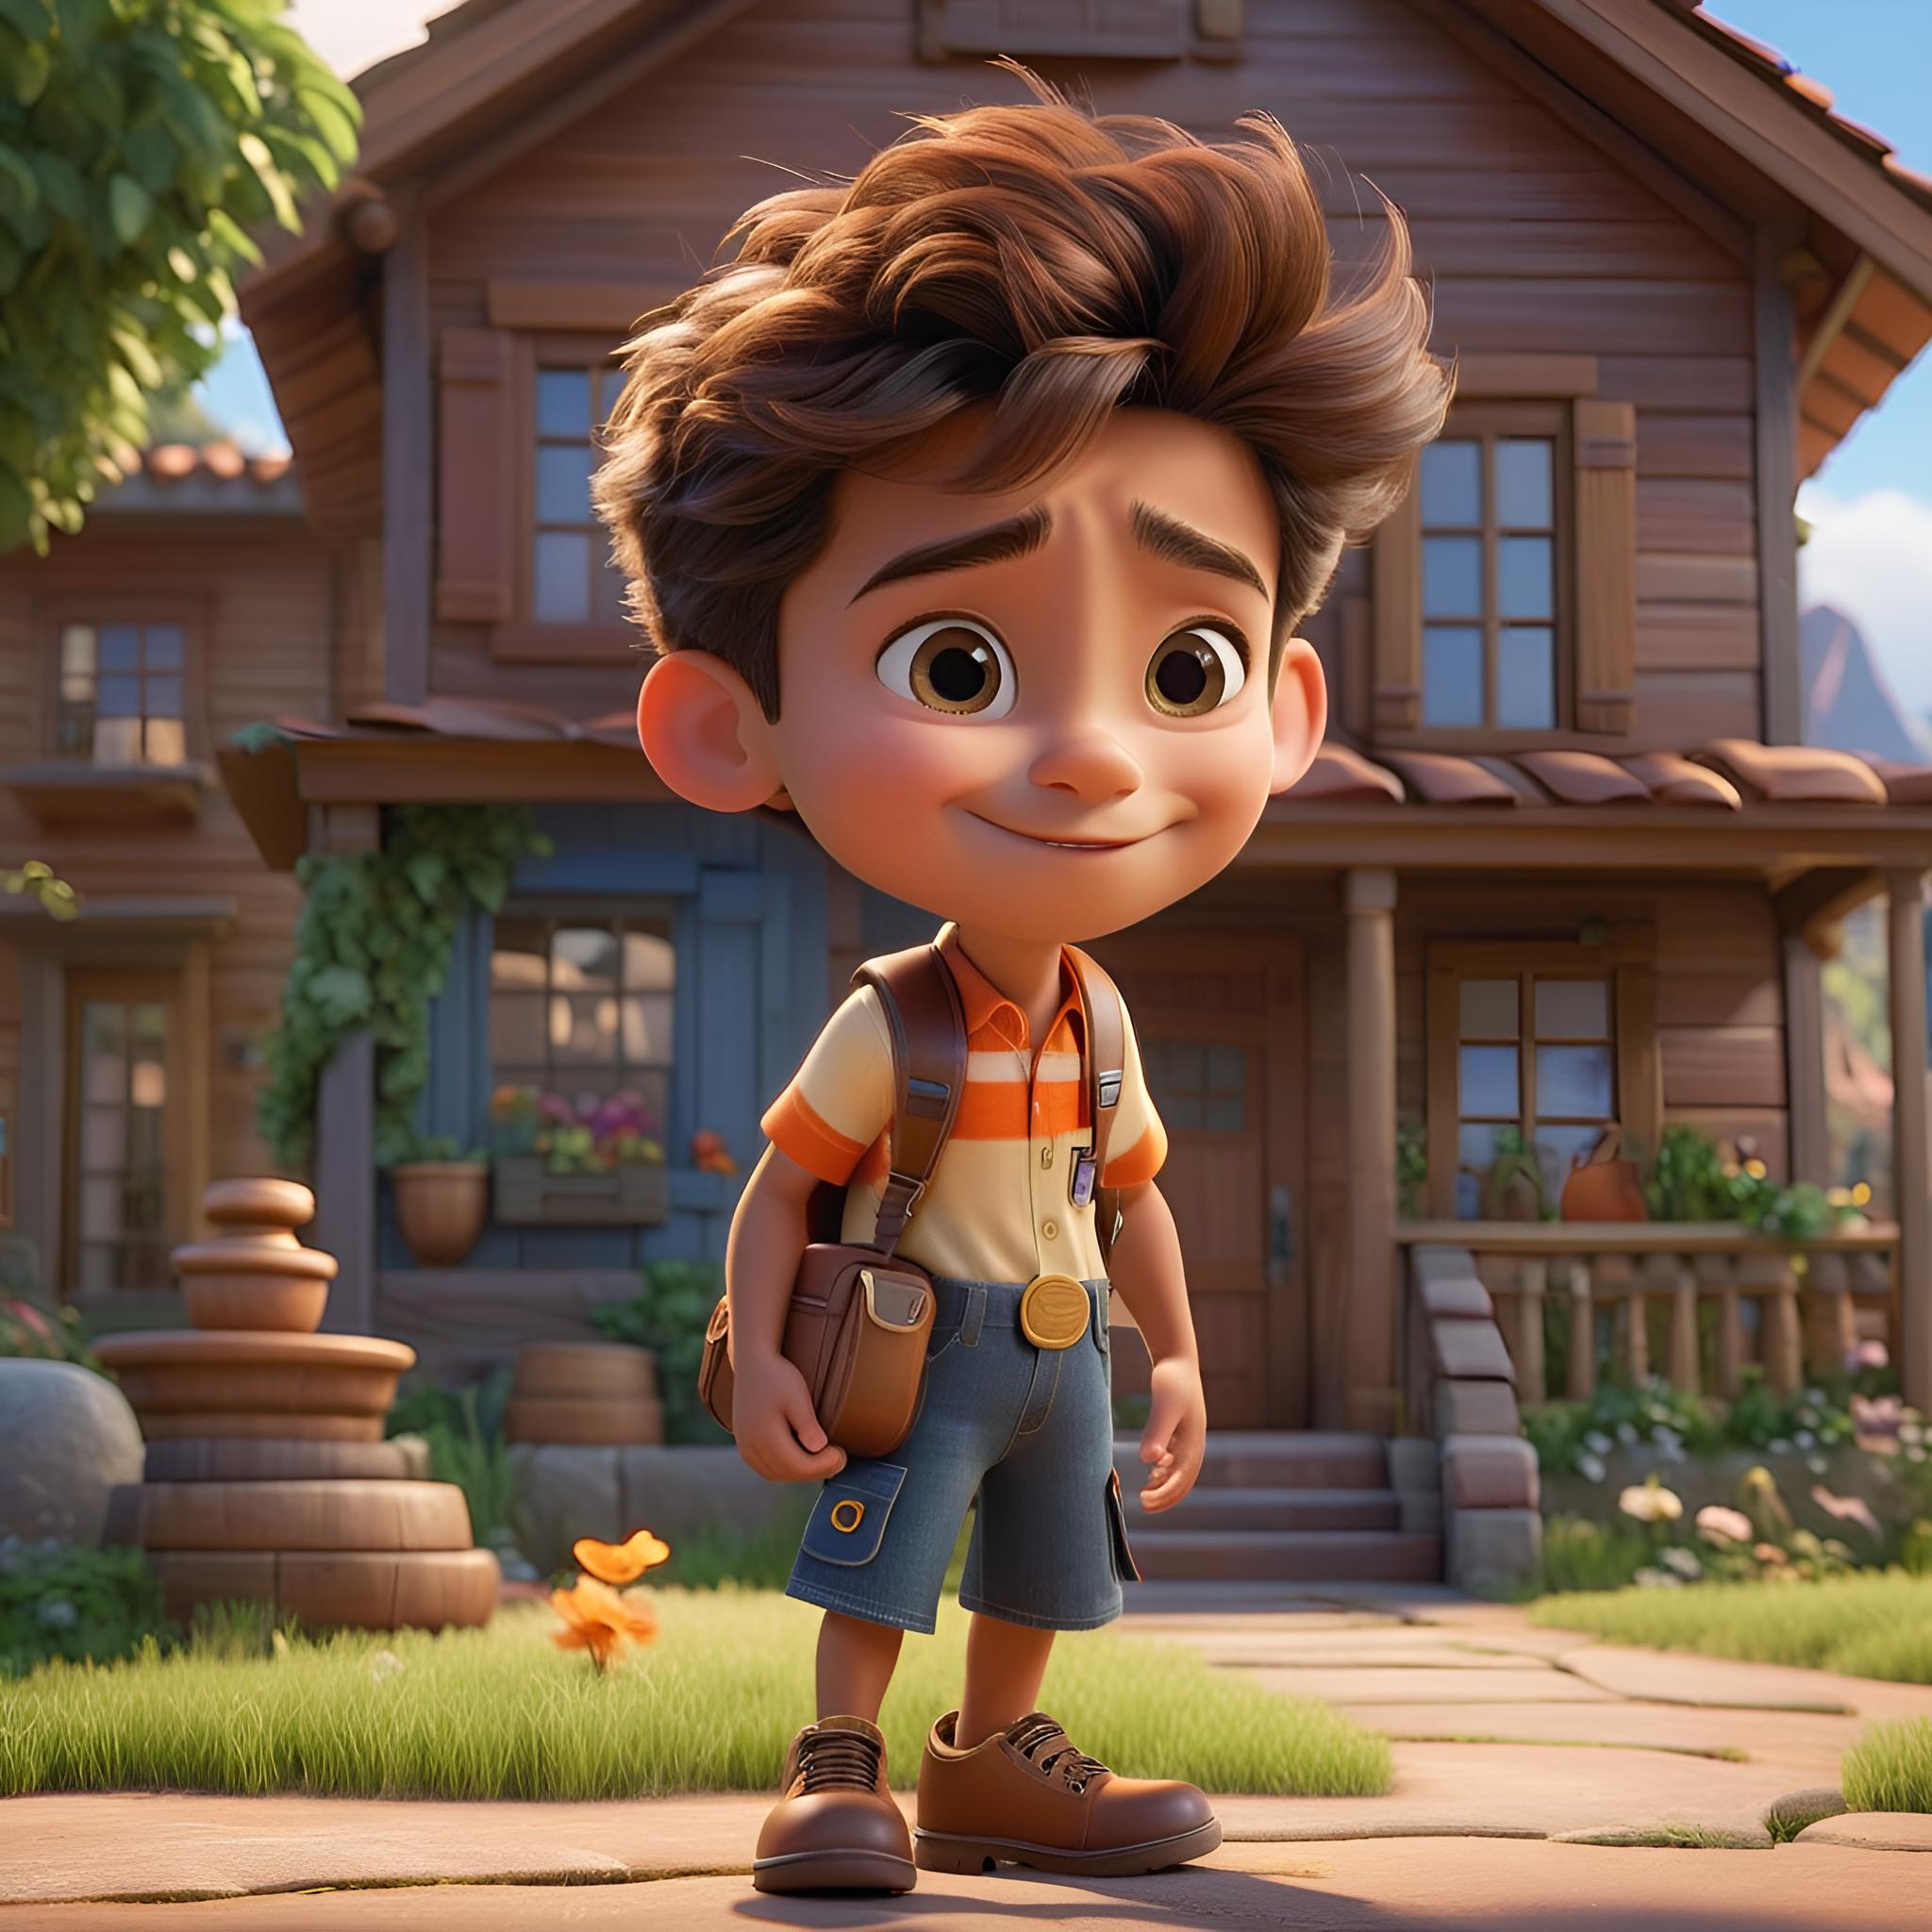 ai cartoon boy stood in front of a house